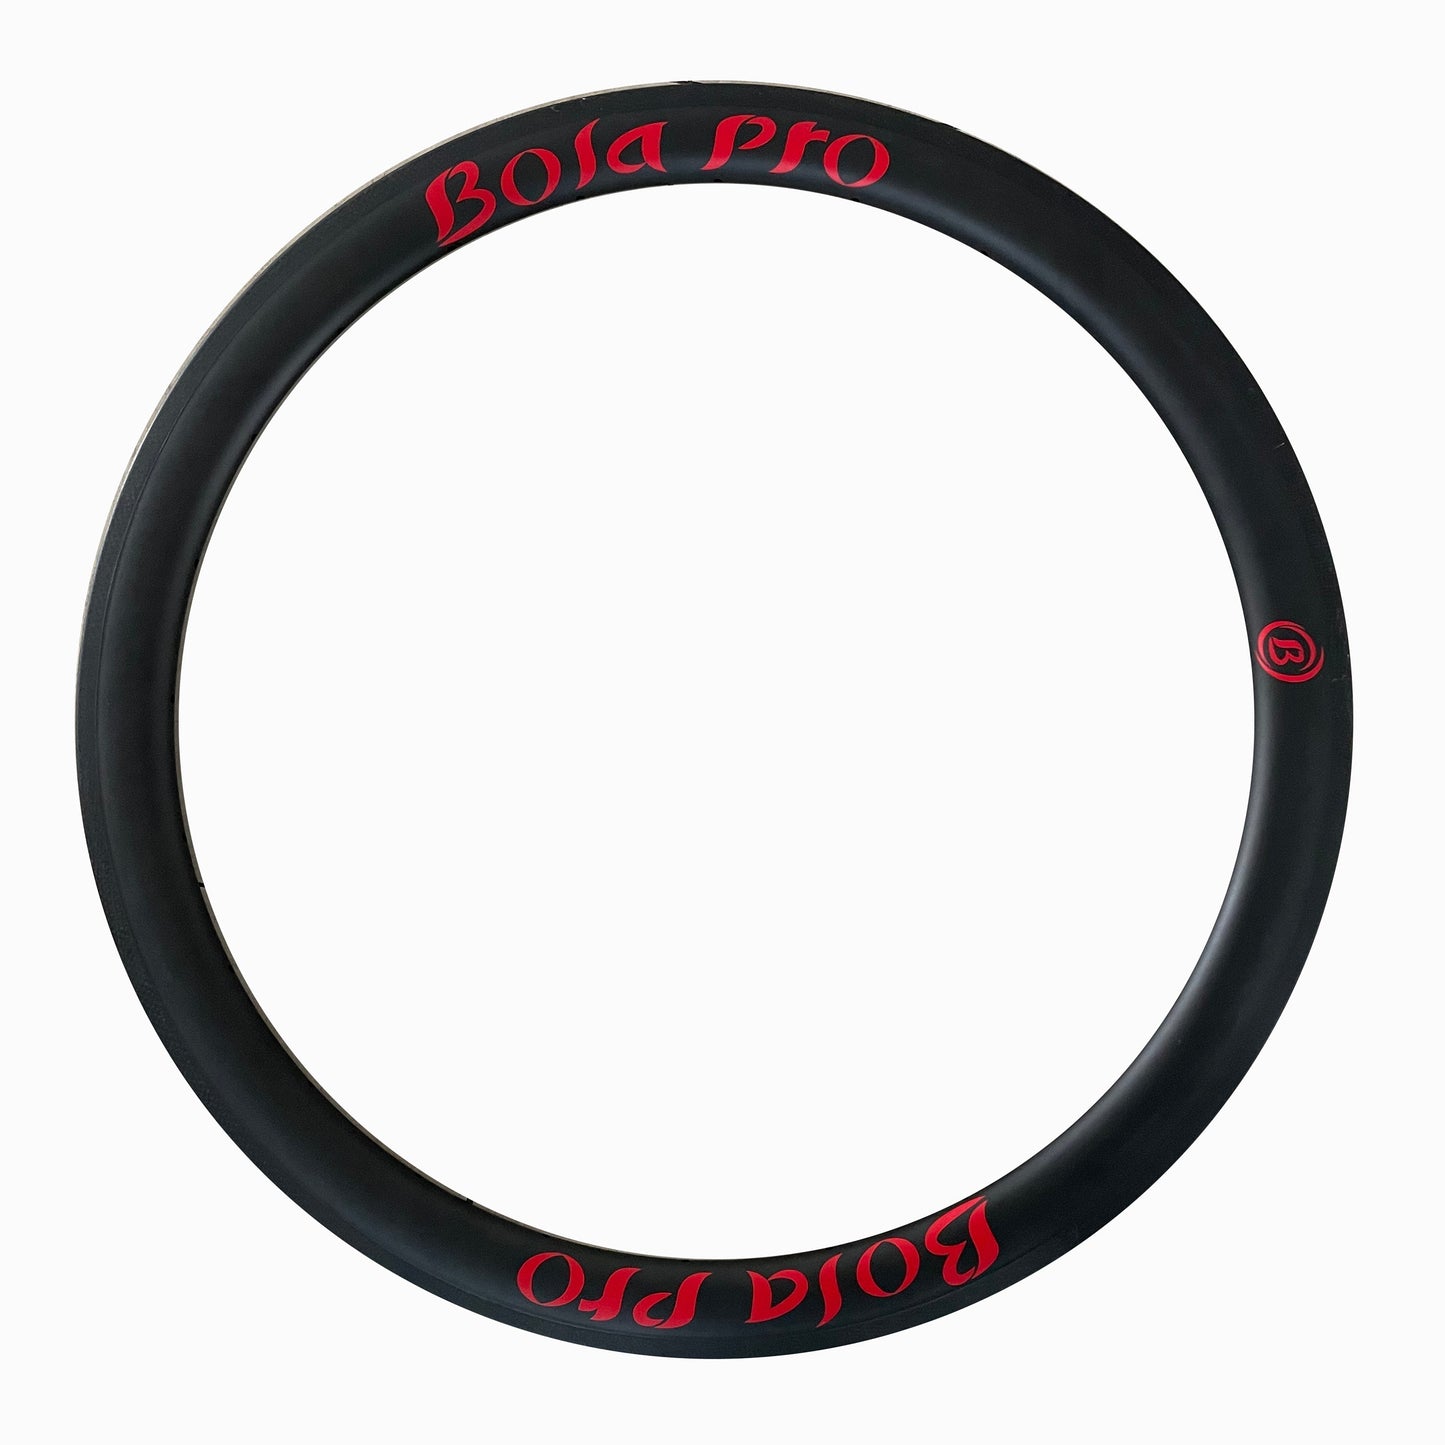 700c tubeless ready gravel carbon bike rims 30mm profile  30mm outer wide 24mm or 25mm inner wide with hooked or hookless option